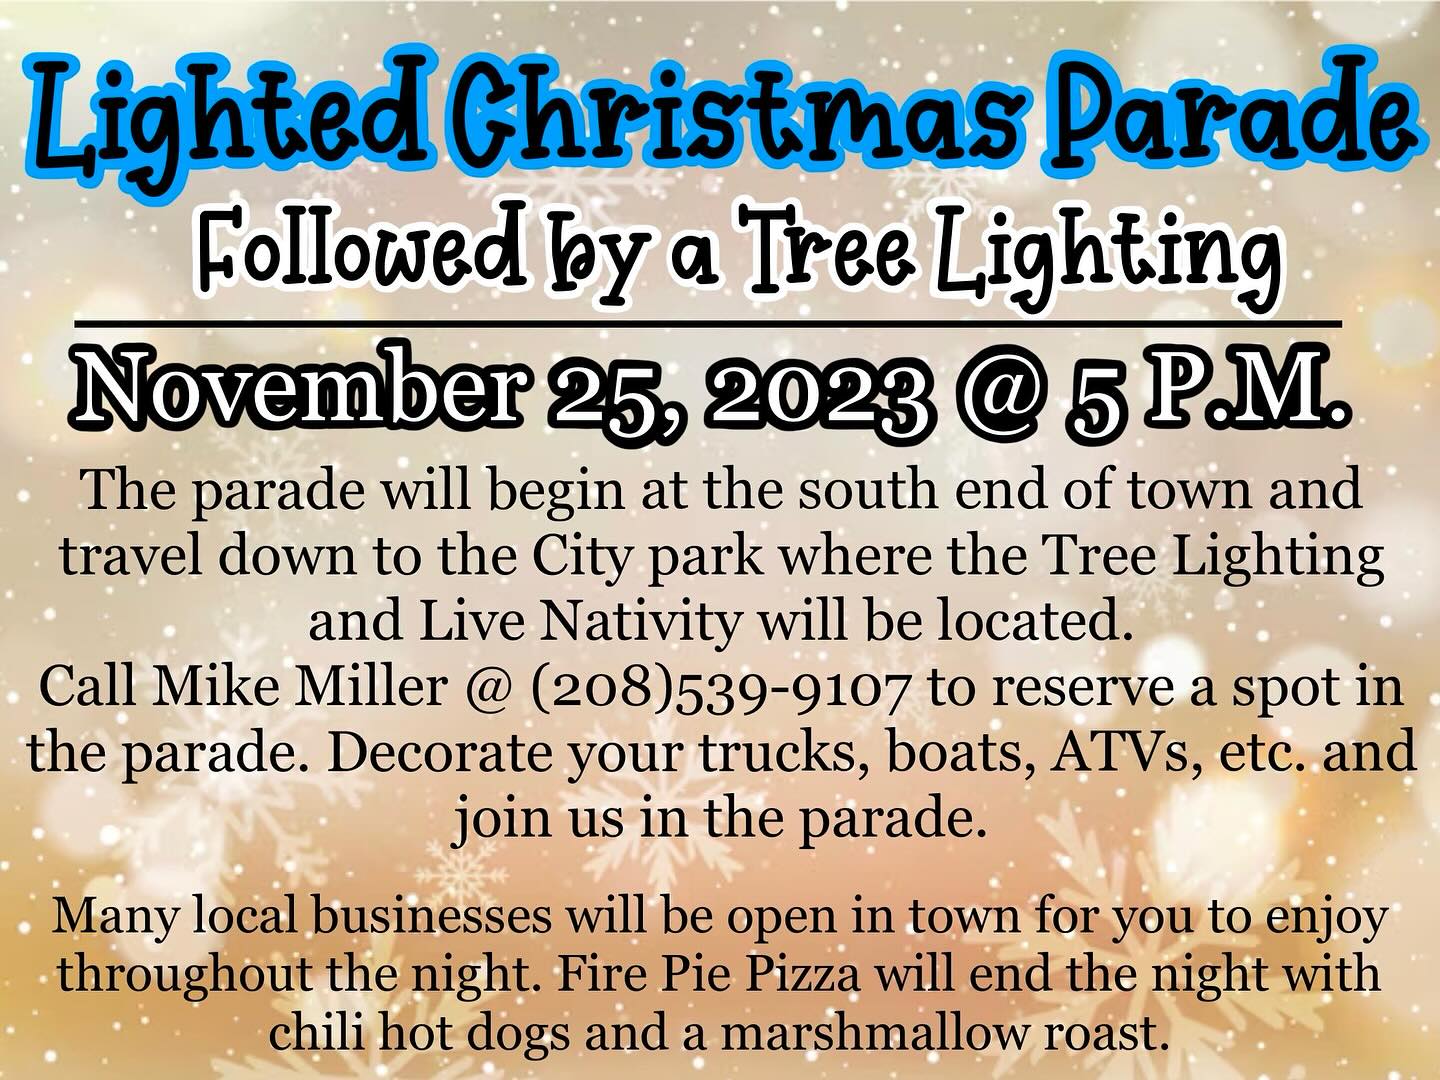 An informational graphic for the Lighted Christmas Parade.